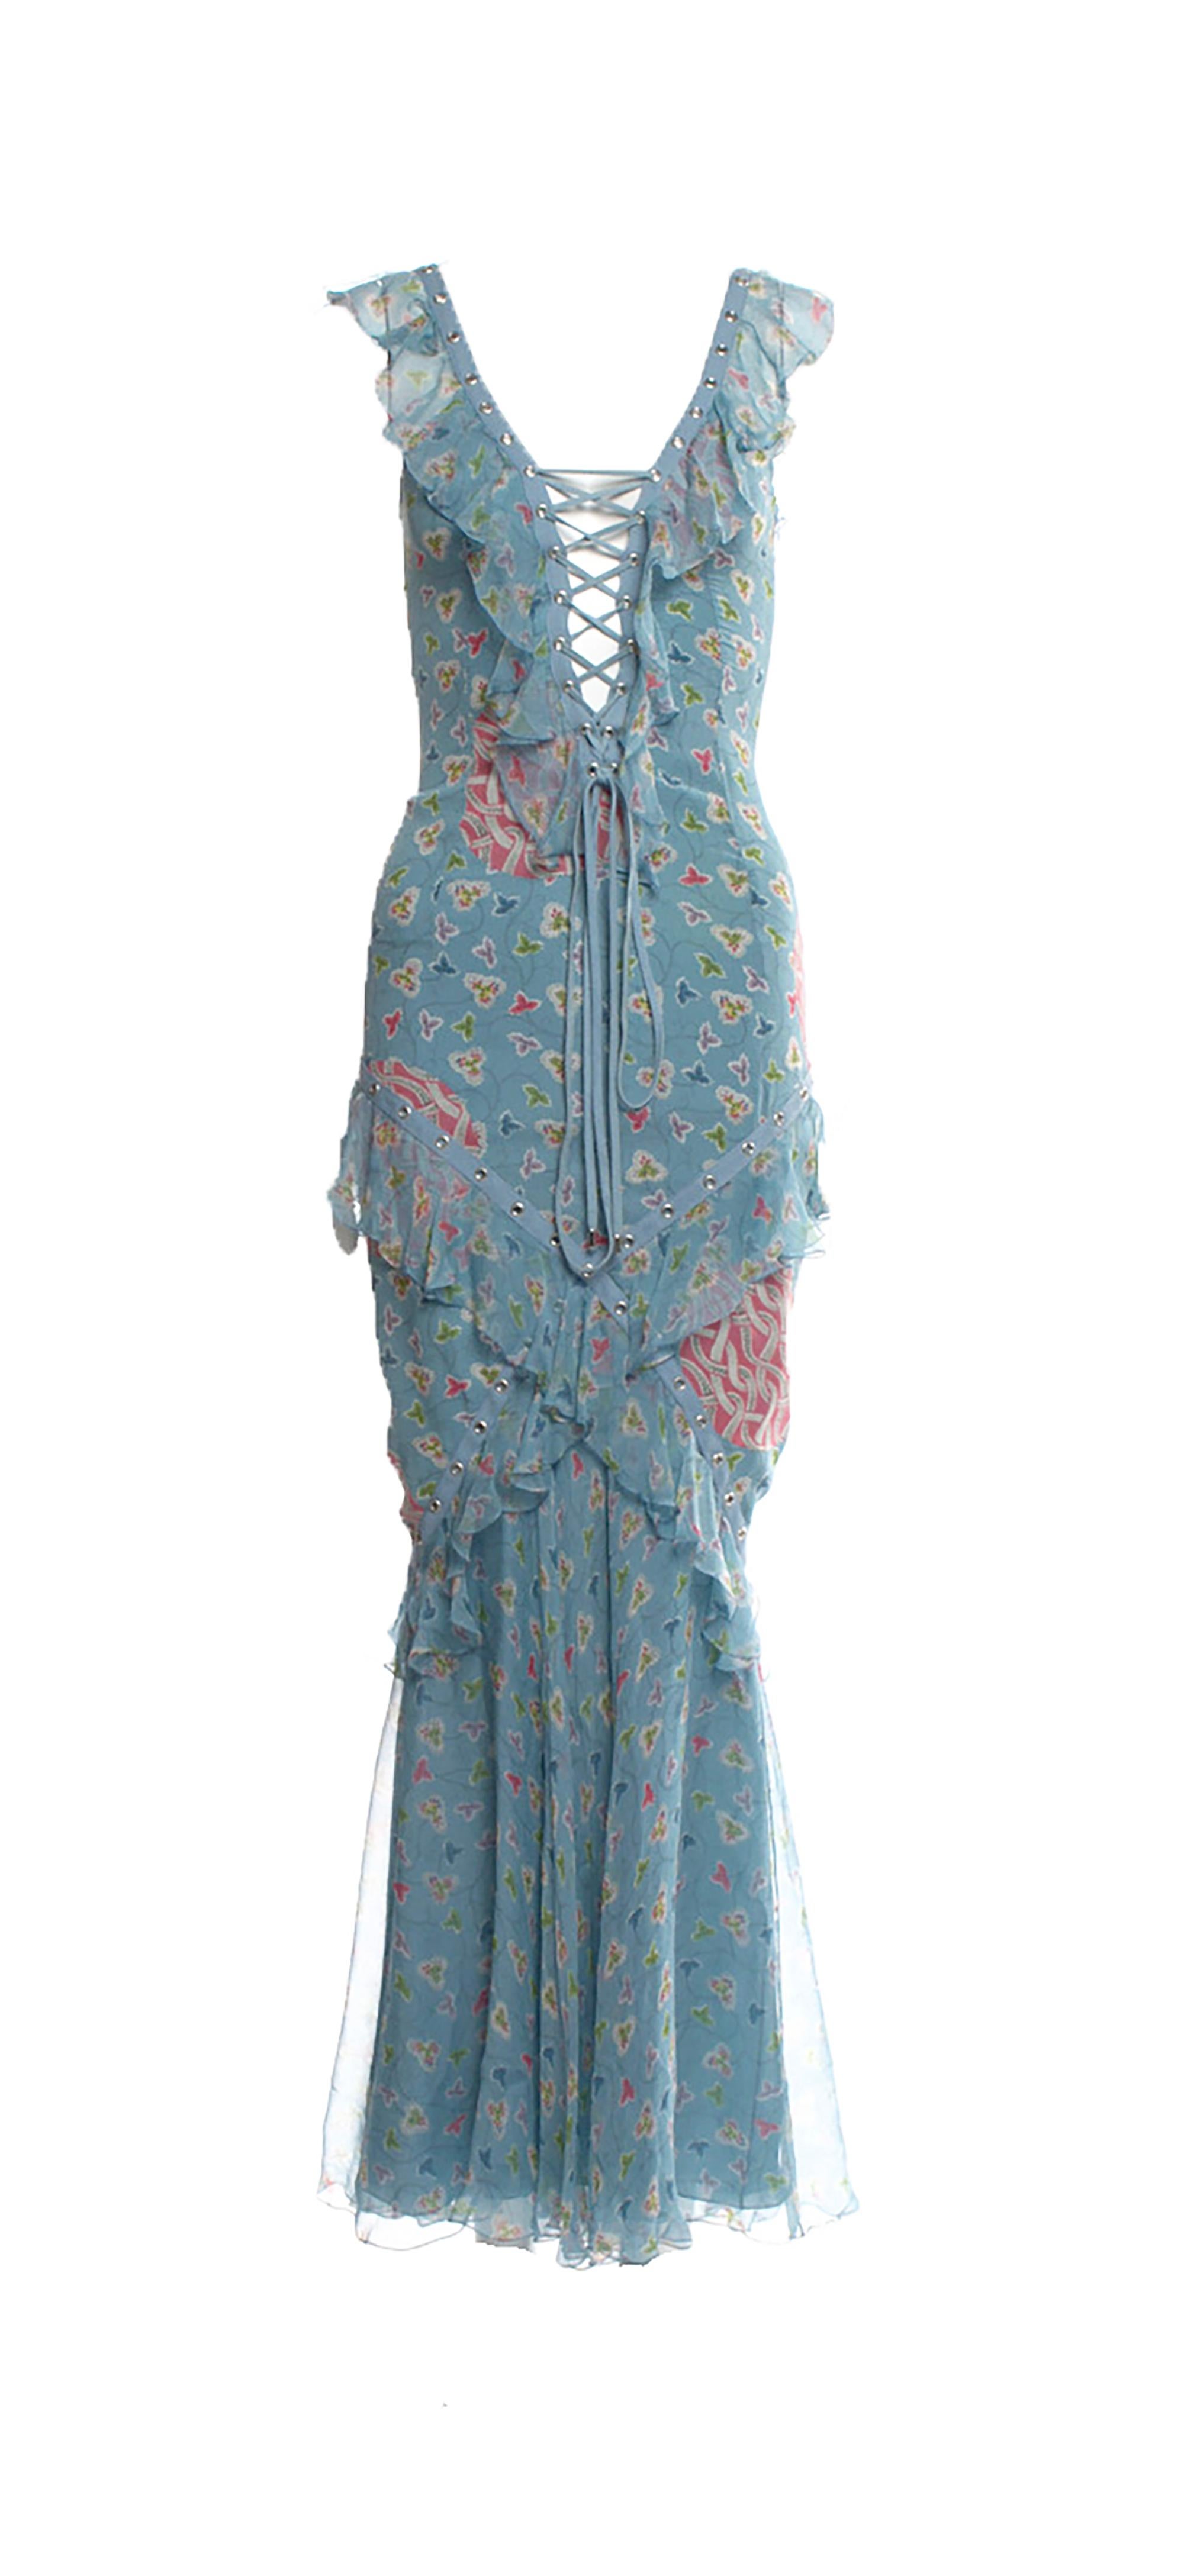 Women's 2003 S/S Christian Dior blue floral gown by Galliano 